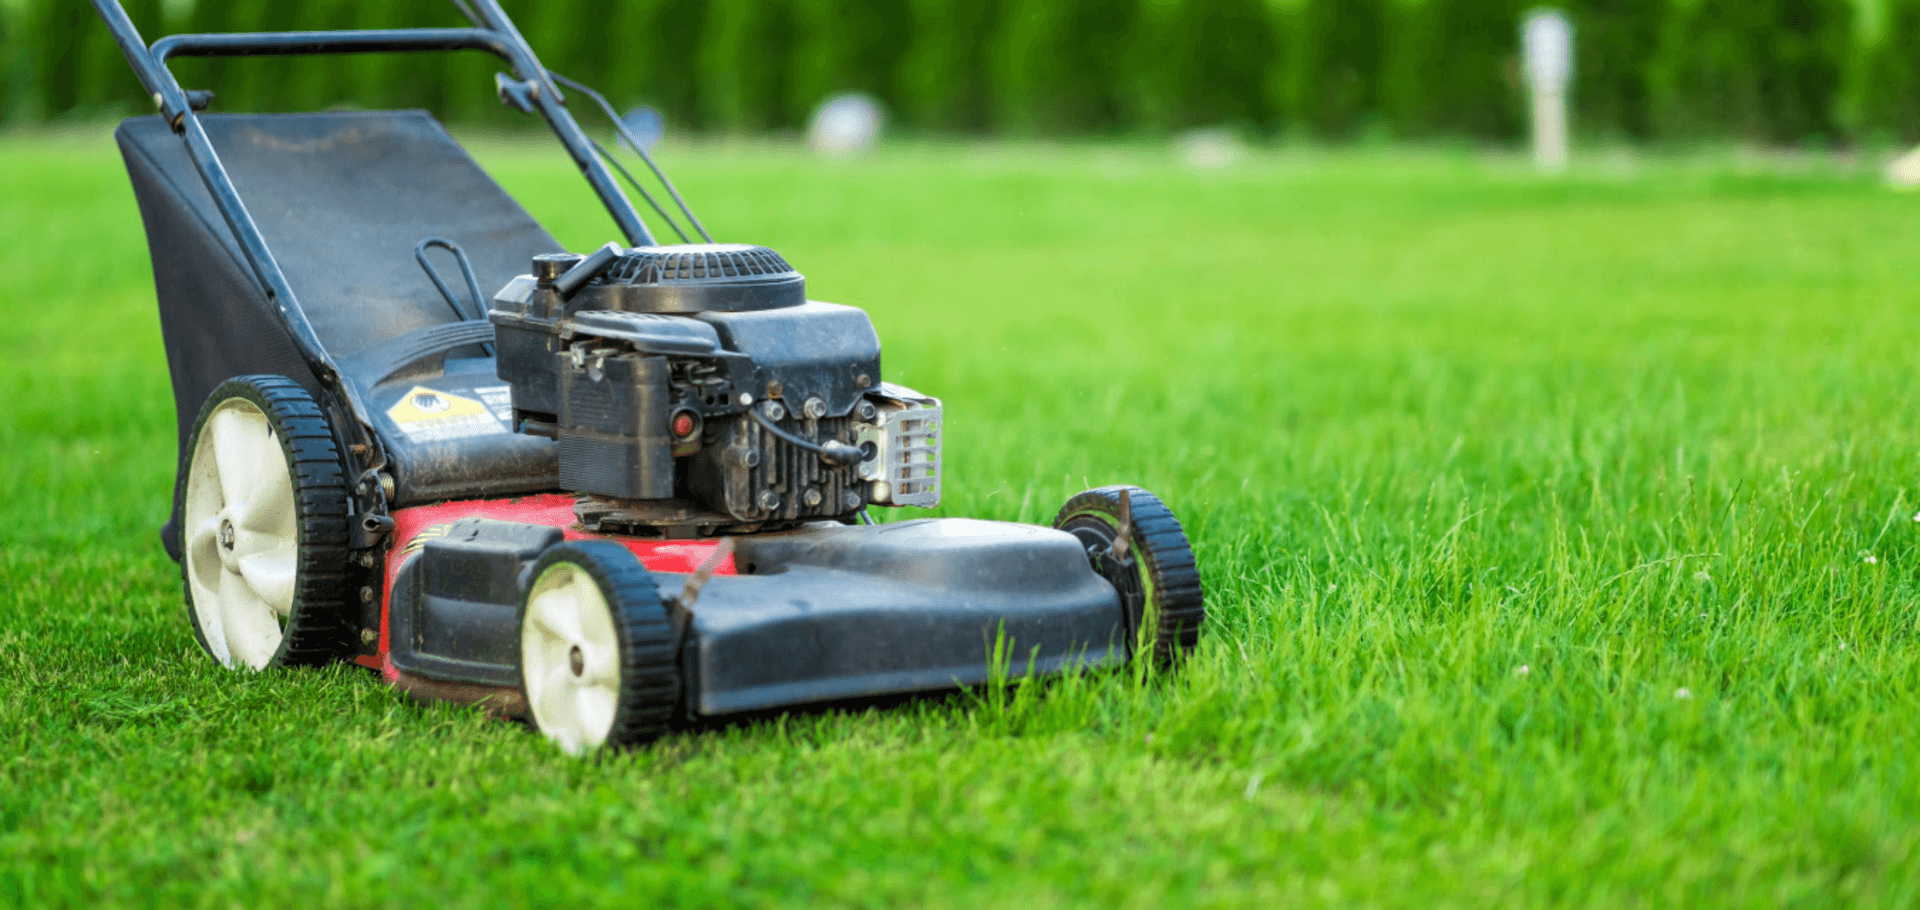 How to use carburetor cleaner on a lawnmower